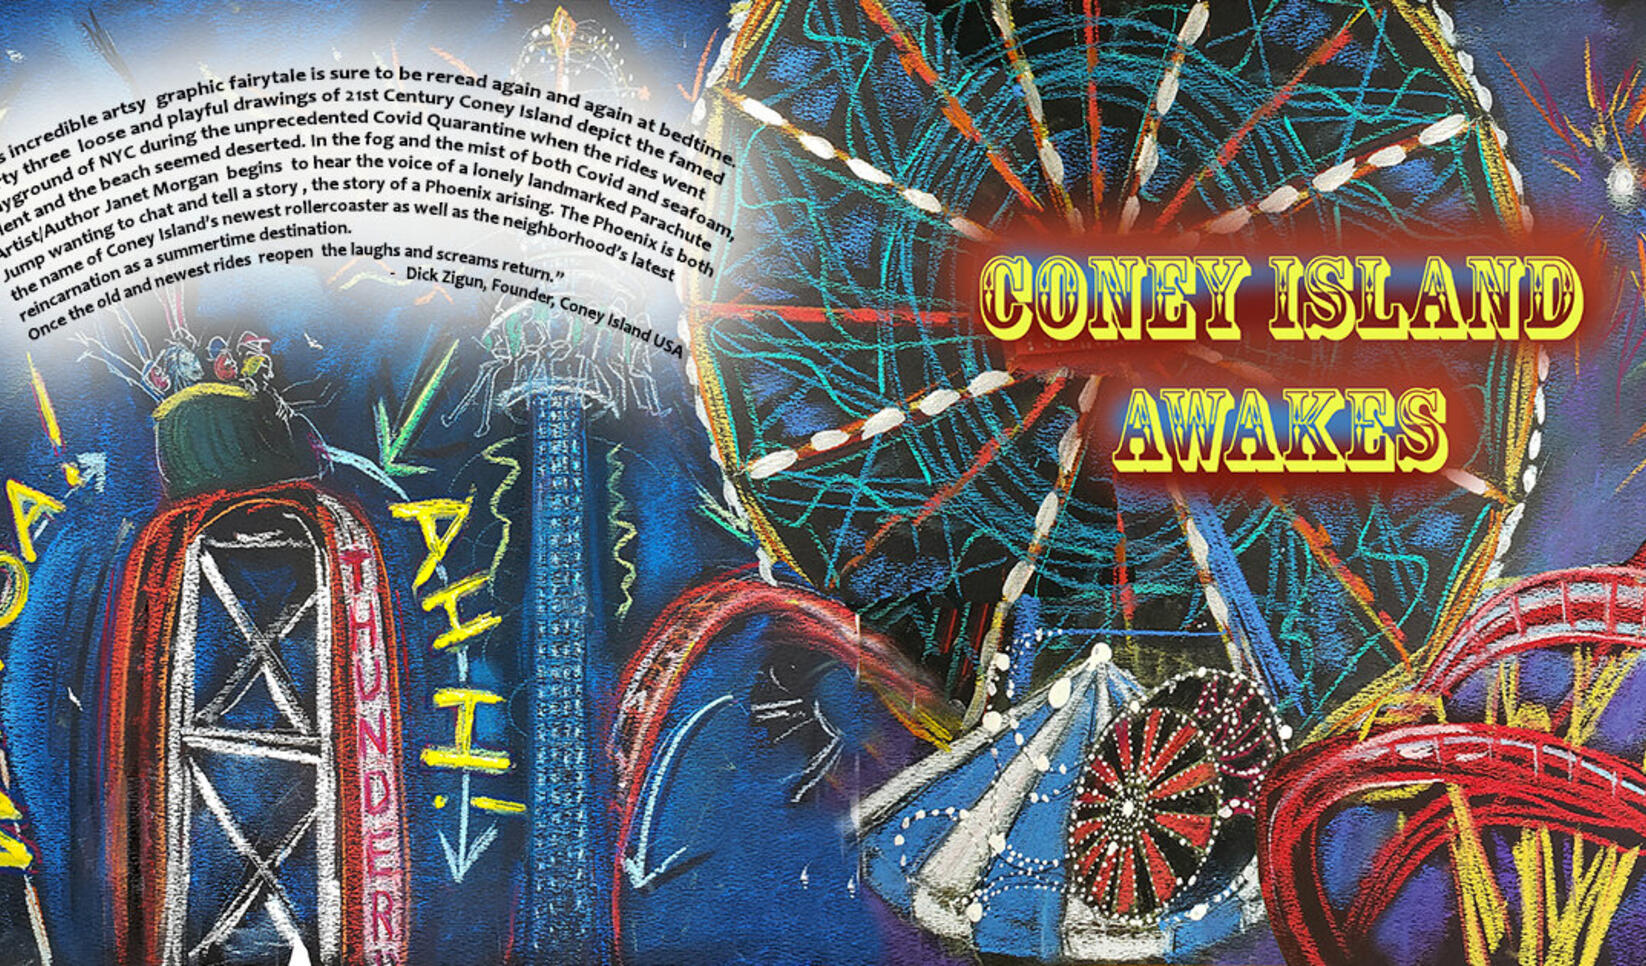 Front and back cover spread of Coney Island Awakes ; Janet Morgan